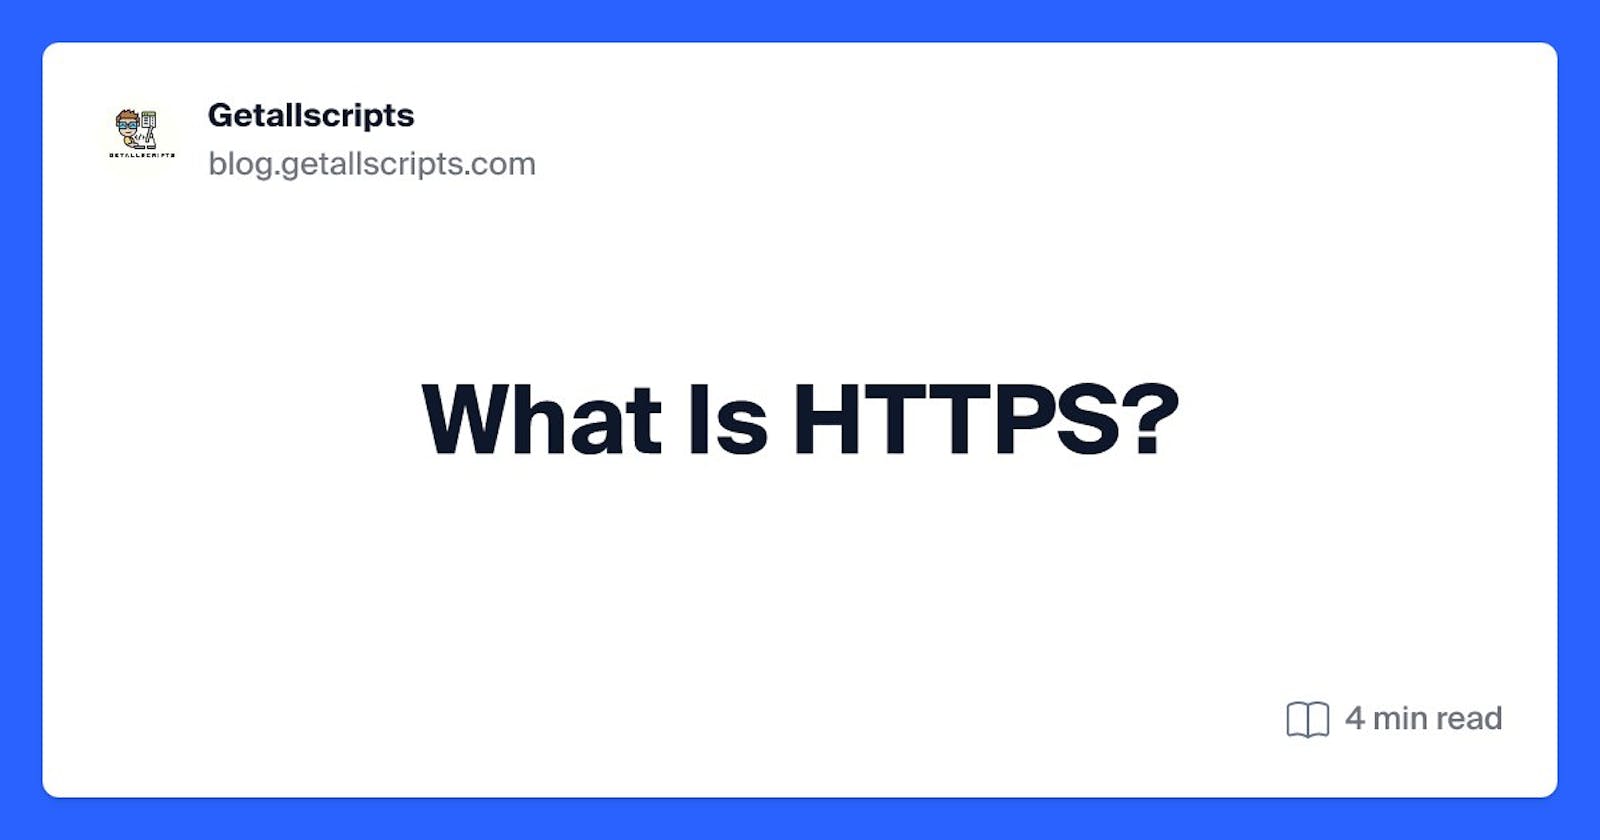 What Is HTTPS?